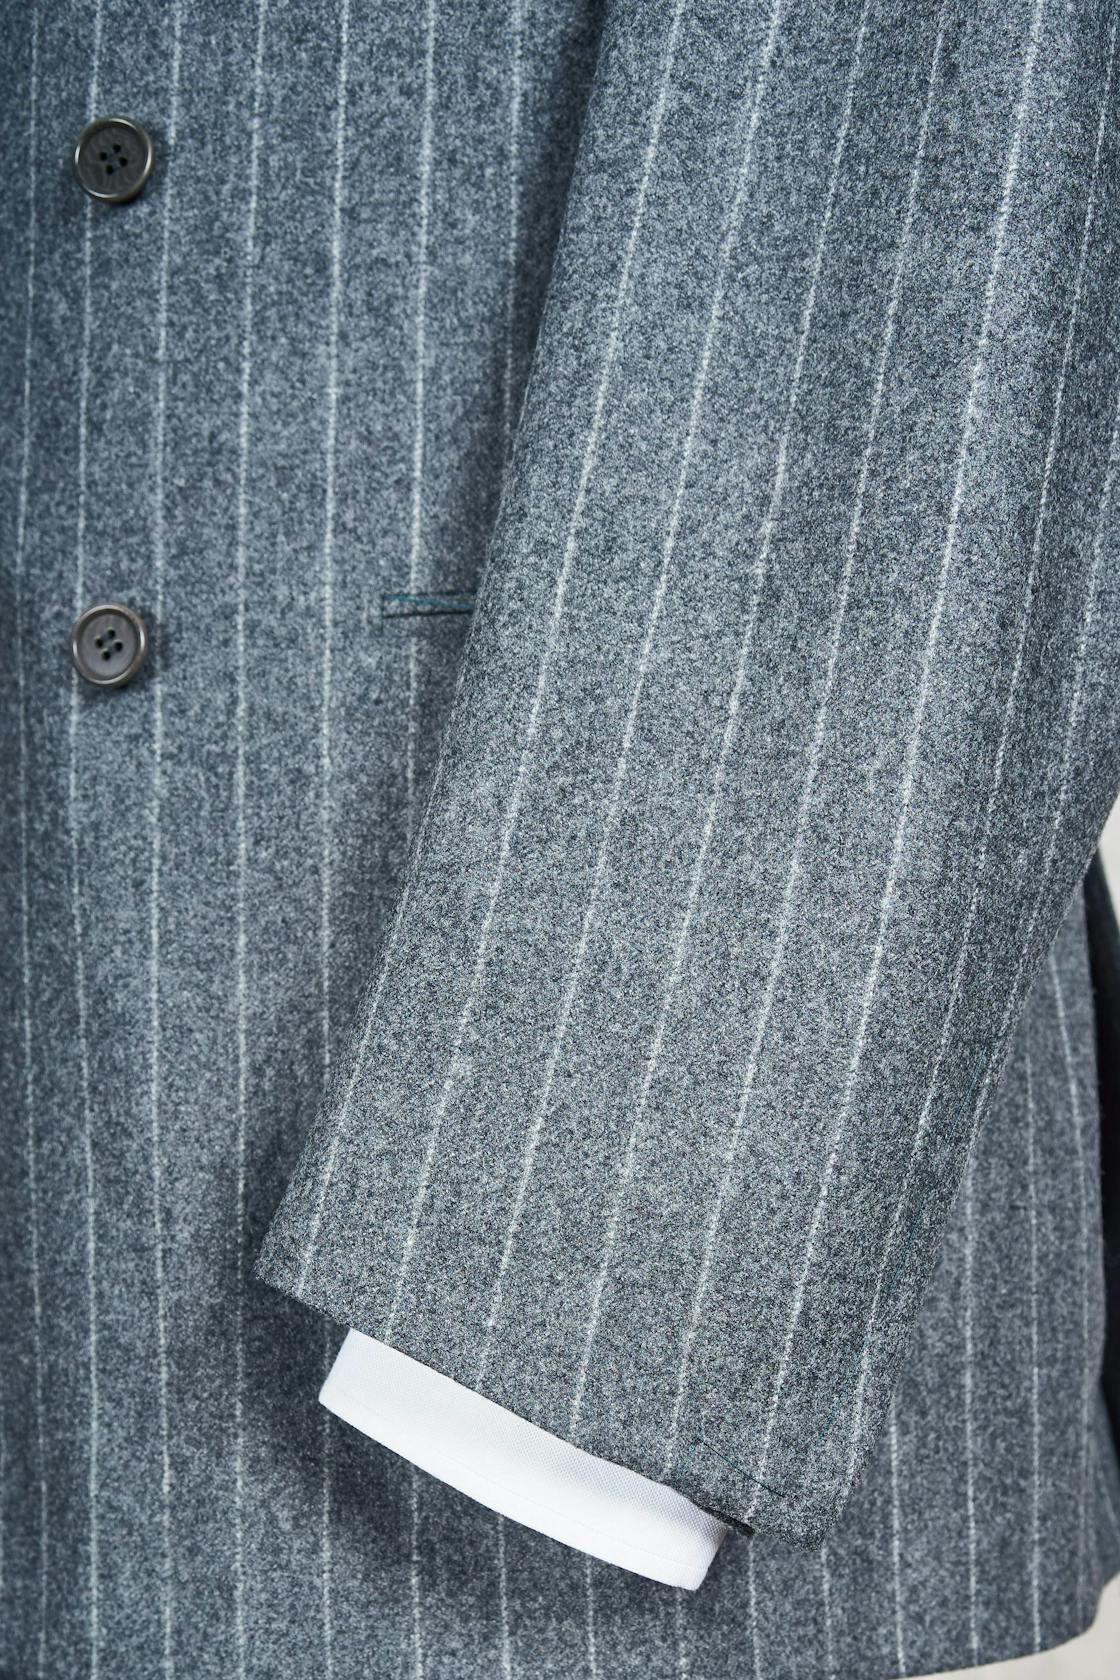 Liverano & Liverano Grey Wool Pinstripe Double Breasted Suit